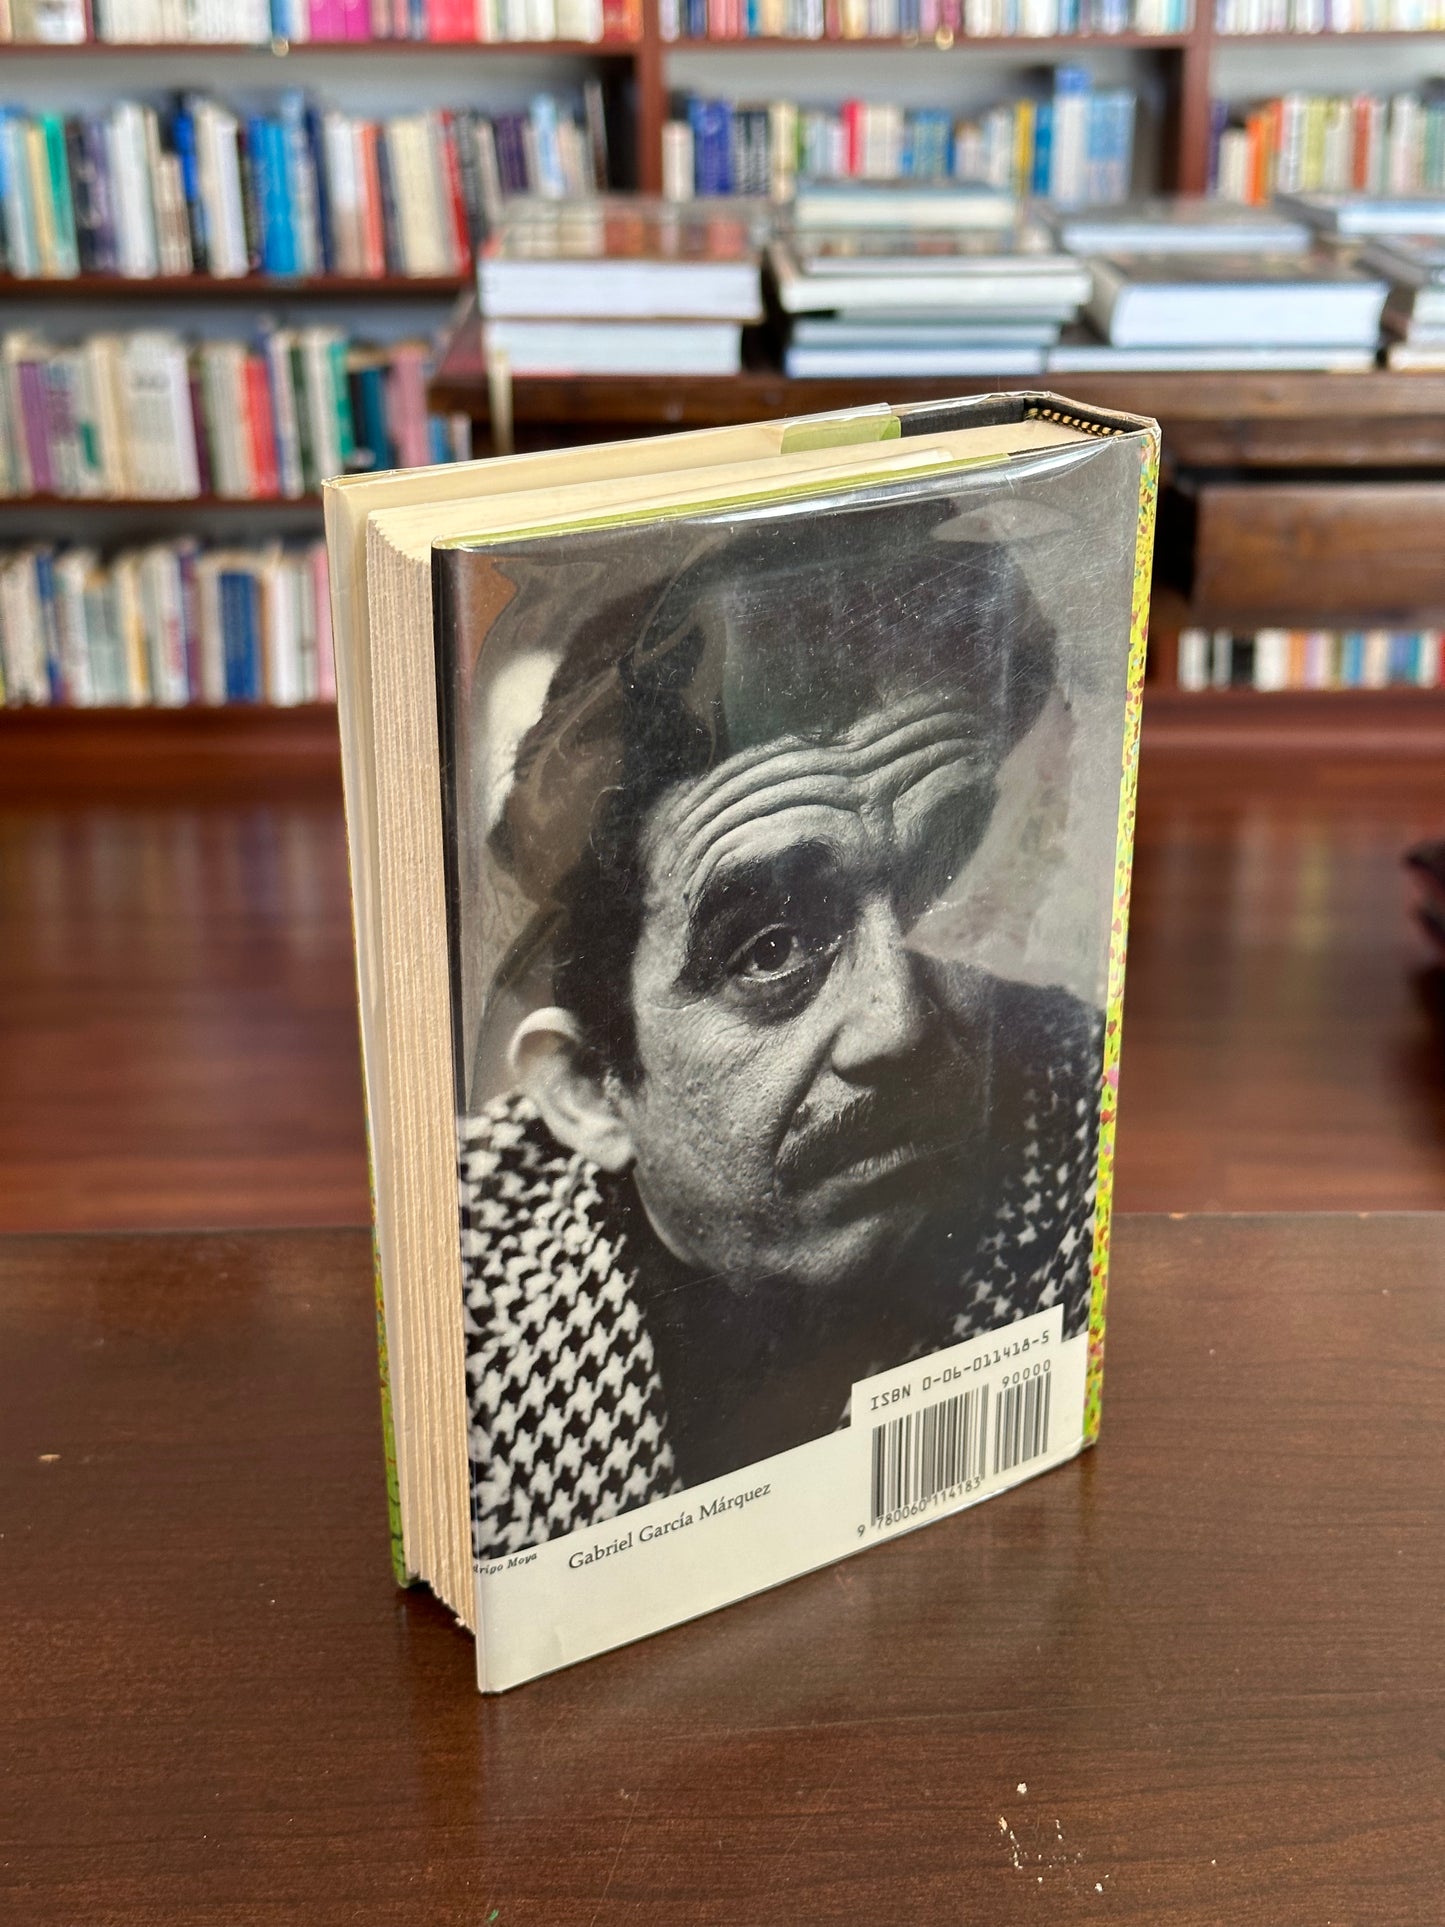 One Hundred Years of Solitude by Gabriel Garcia Marquez (First Edition)